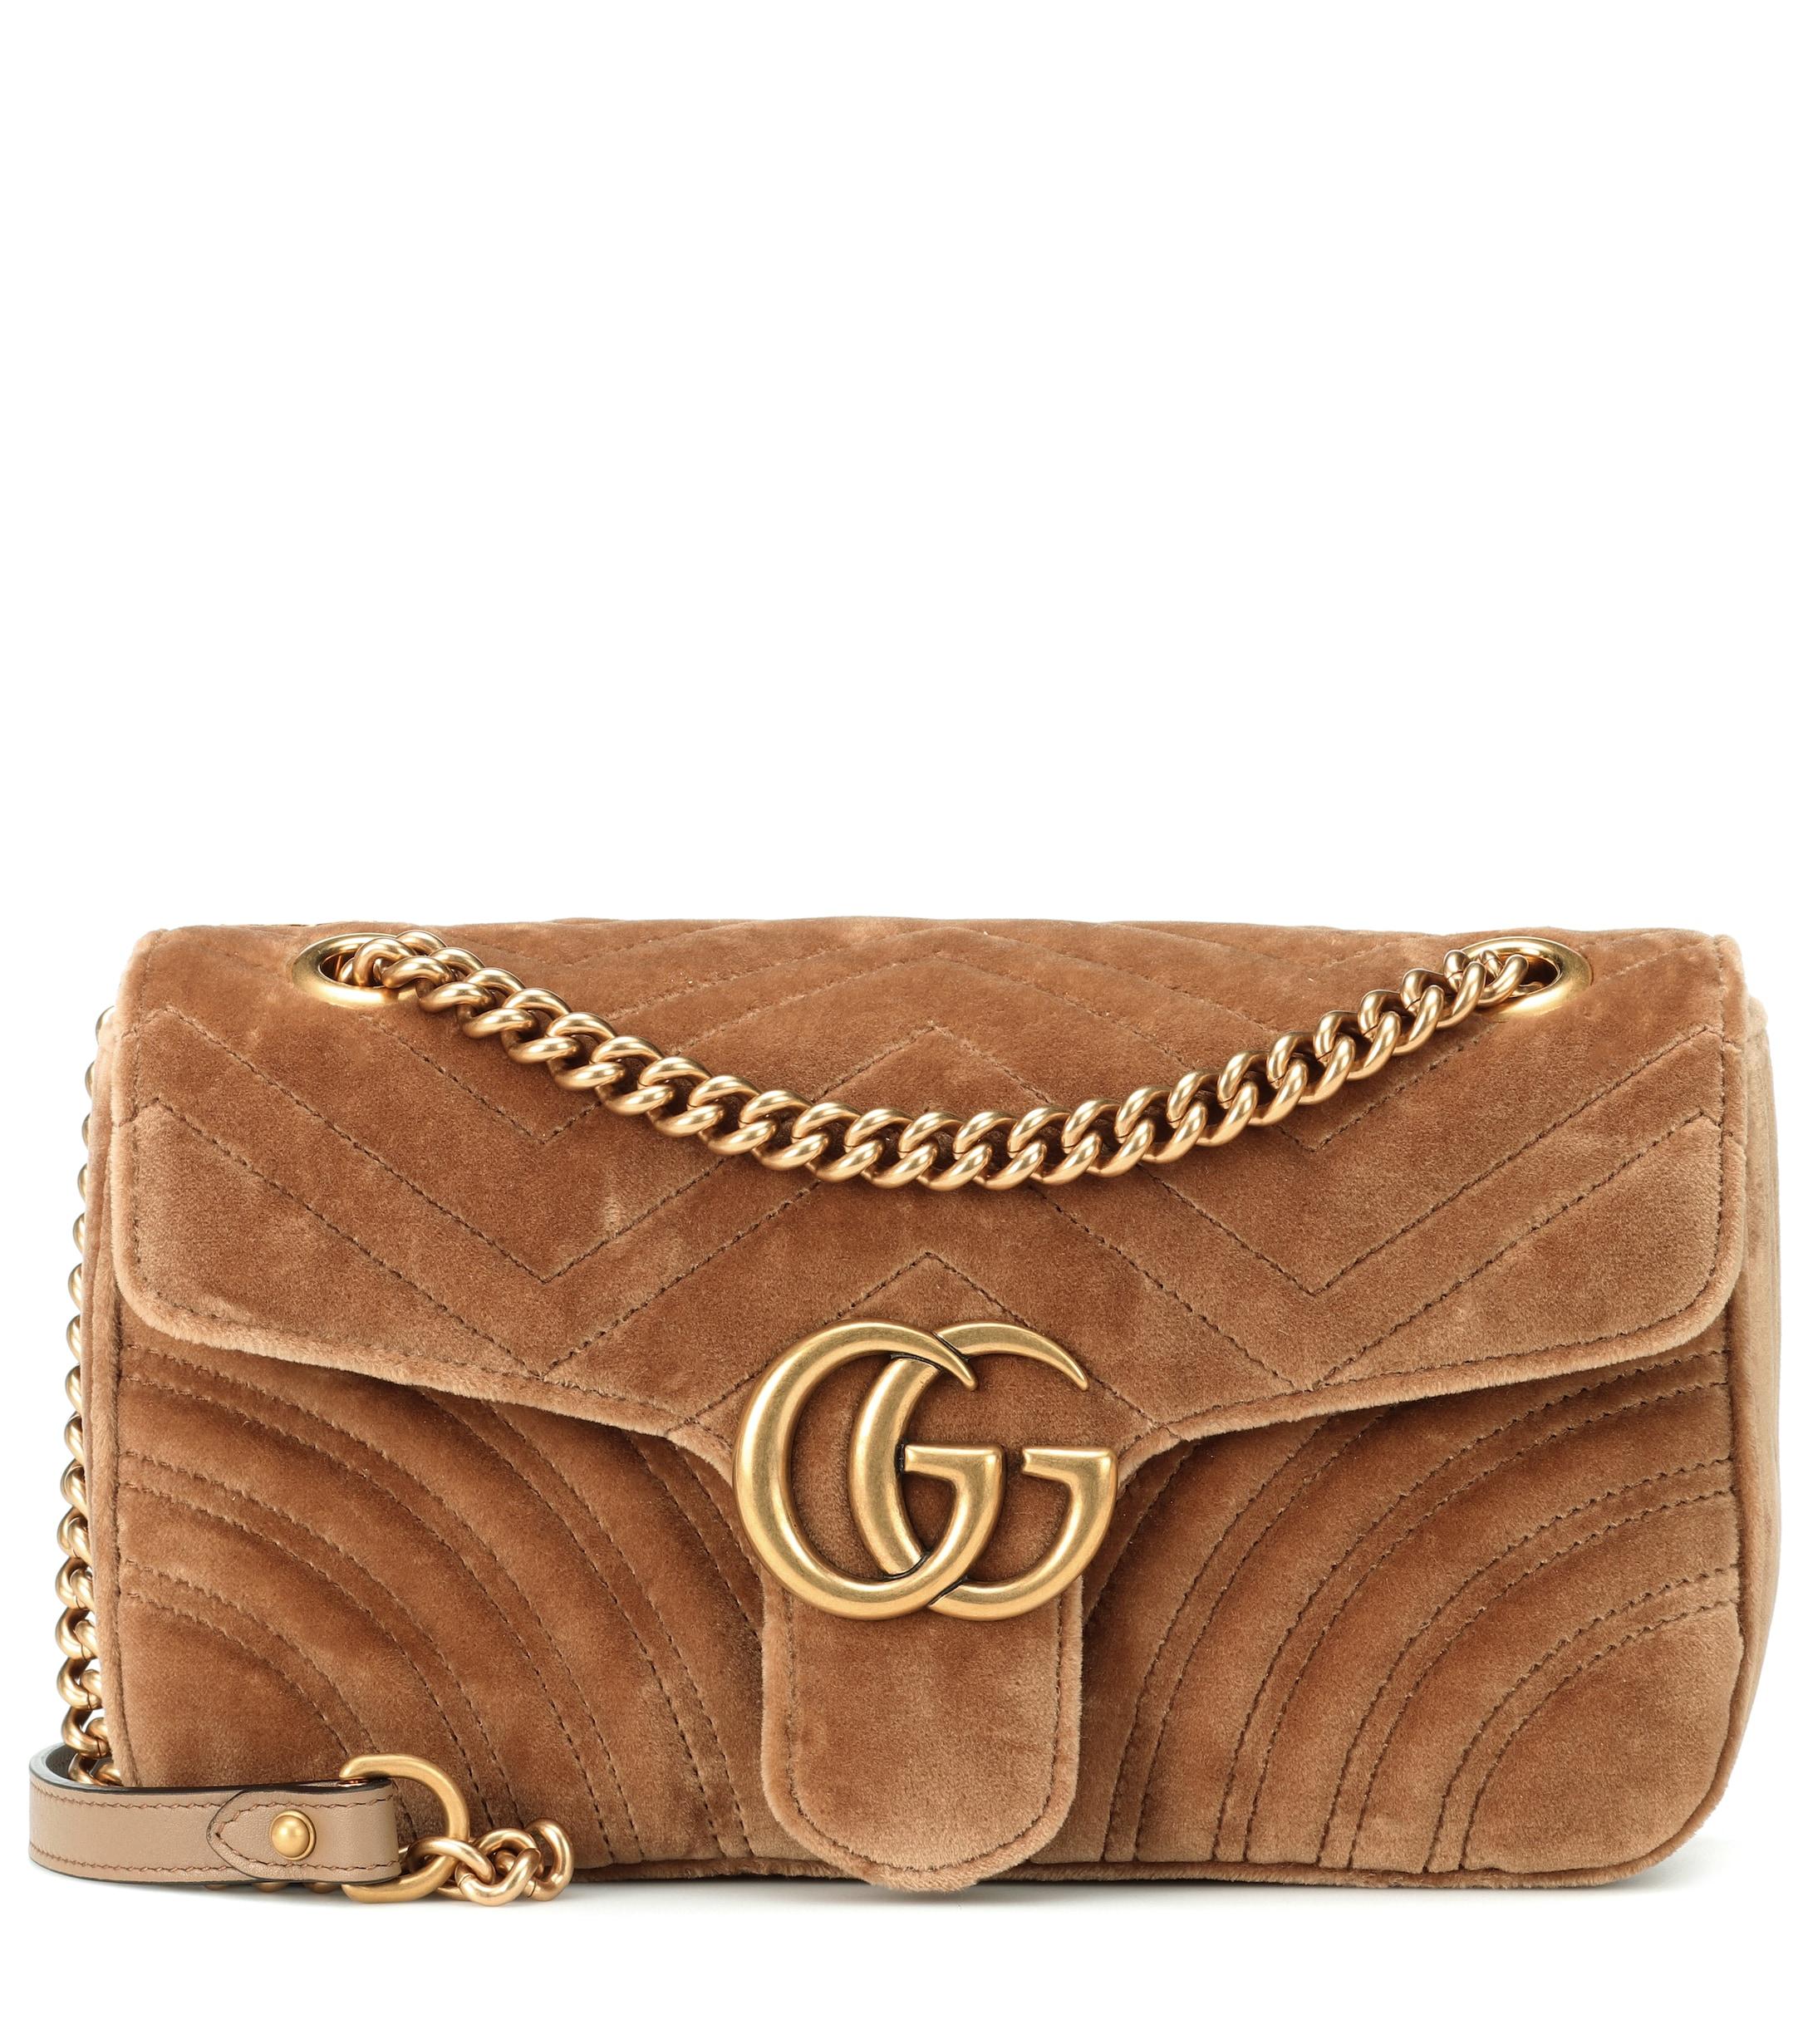 Gucci Marmont Samt Store, 59% OFF | www.angloamericancentre.it